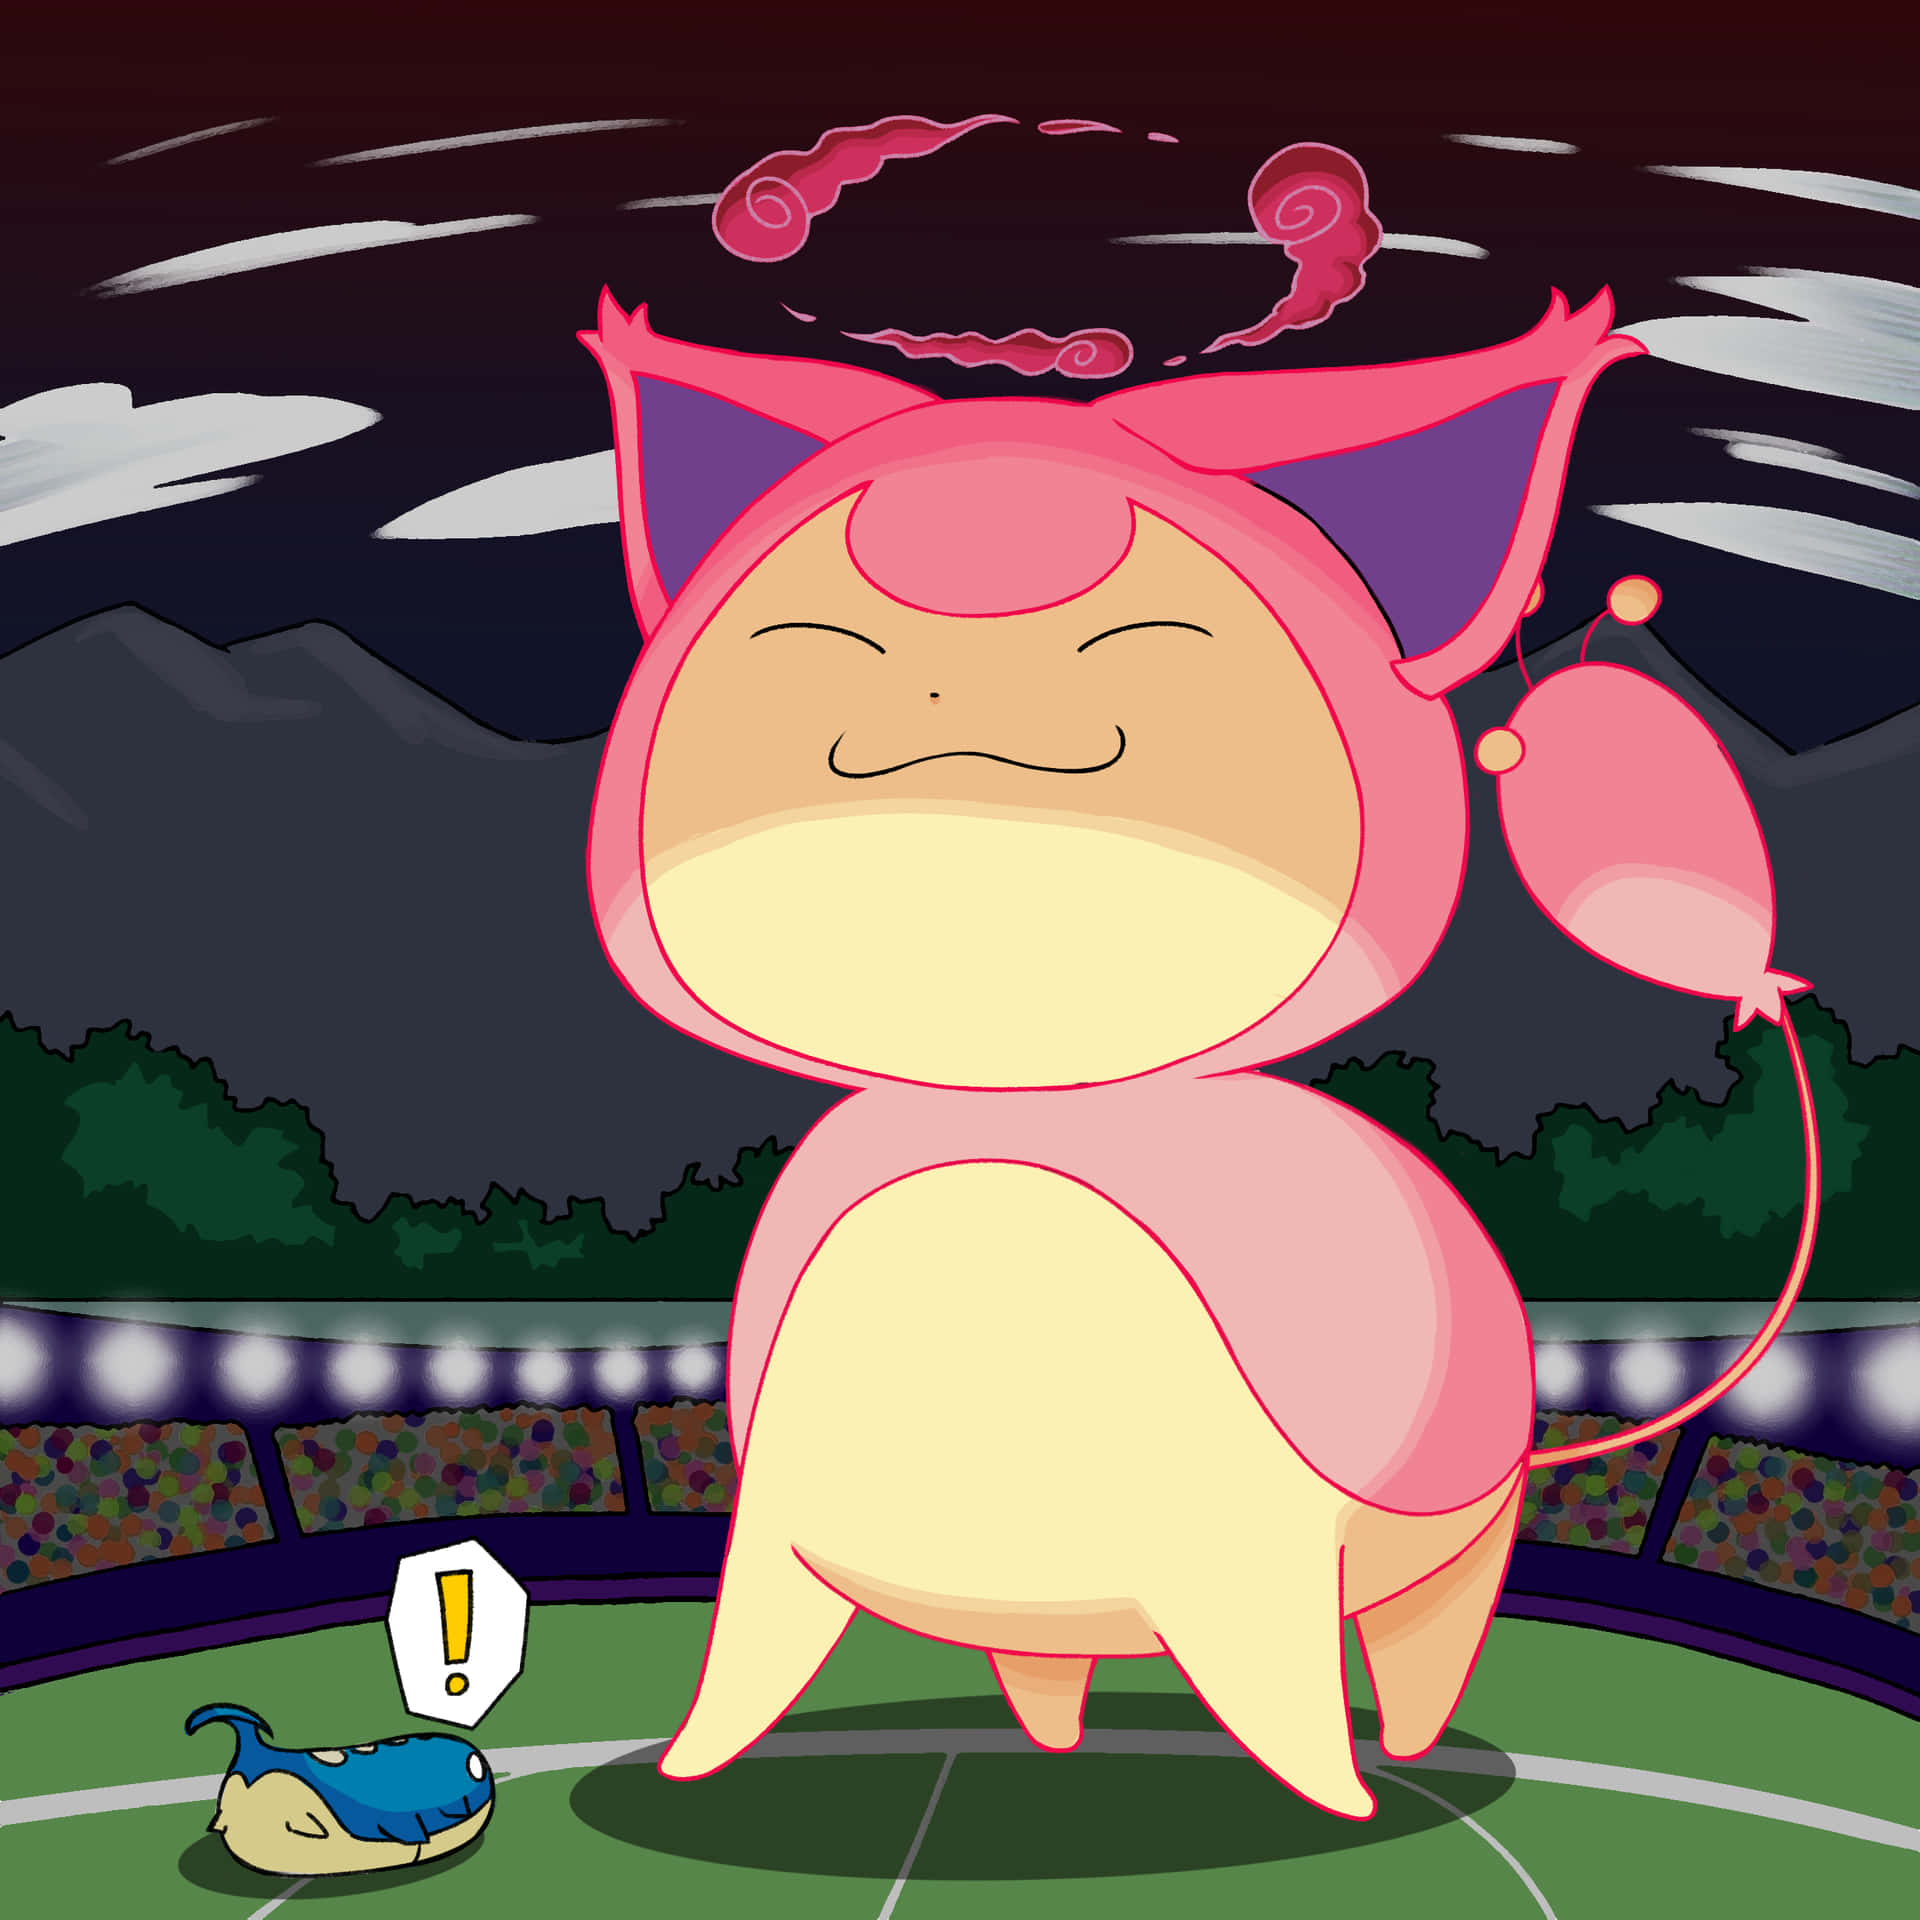 Dynamaxskitty Is A Term Used In The Pokémon Video Game Series. It Refers To An Enhanced Version Of The Pokémon Character Skitty, Which Can Grow To A Massive Size And Gain Increased Strength And Abilities. In The Context Of Computer Or Mobile Wallpaper, 